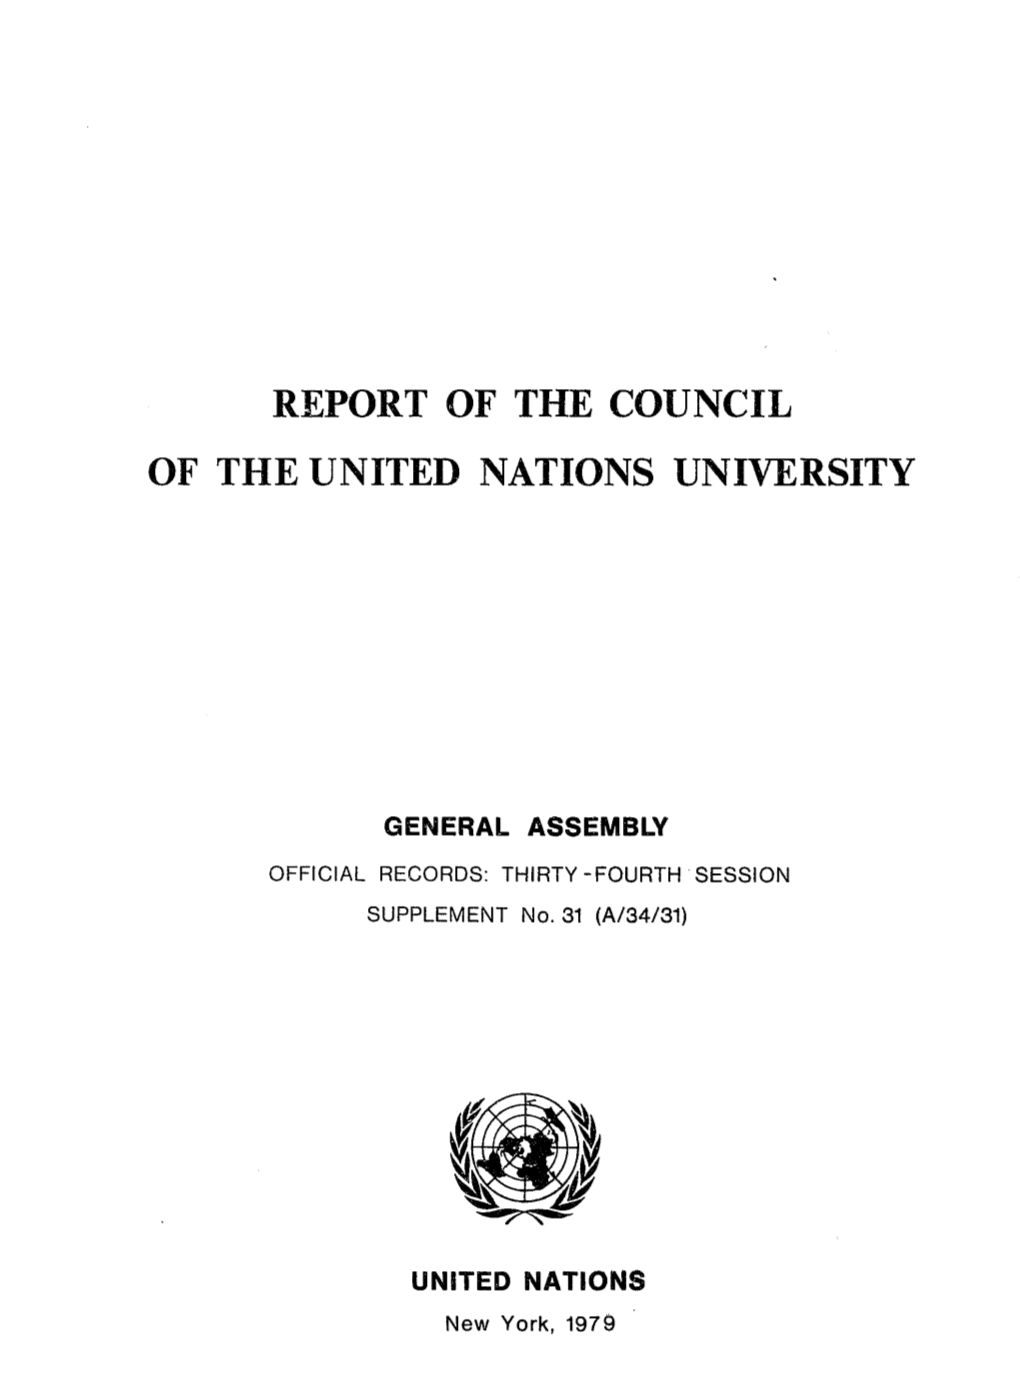 Report of the Council of the United Nations University